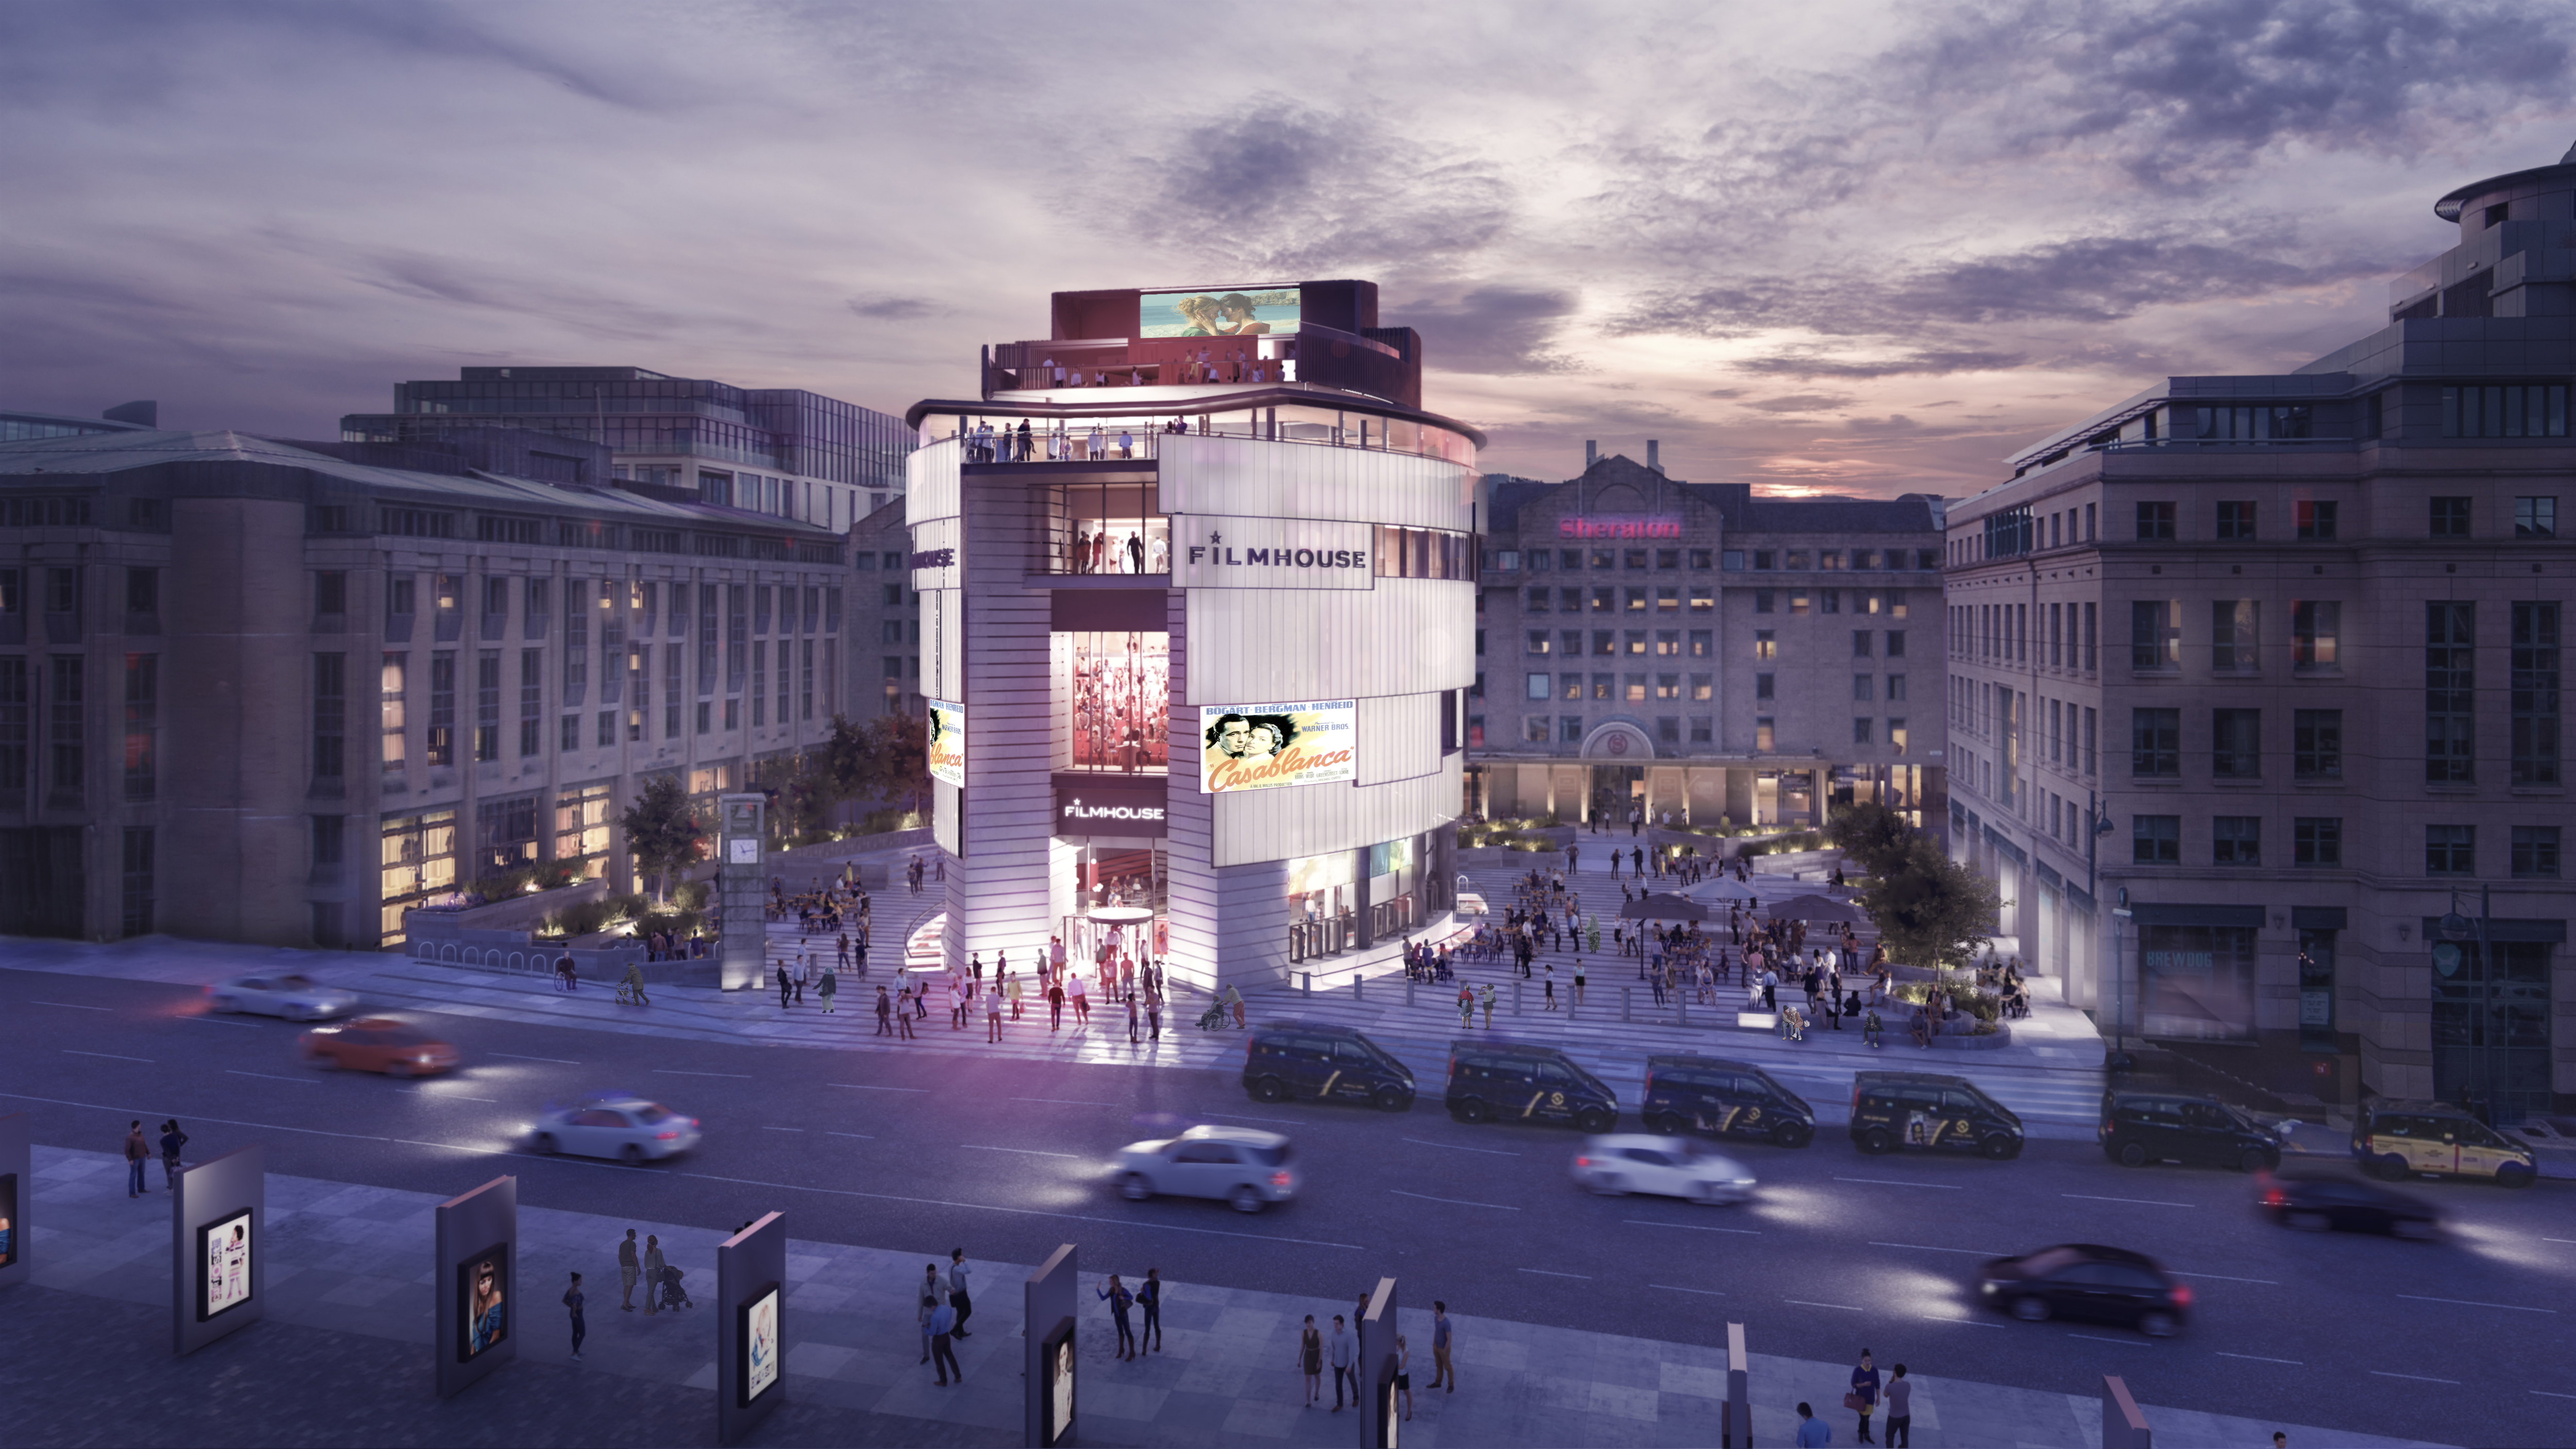 Artist's impression of the New Filmhouse building, taken from the roof of the Usher Hall